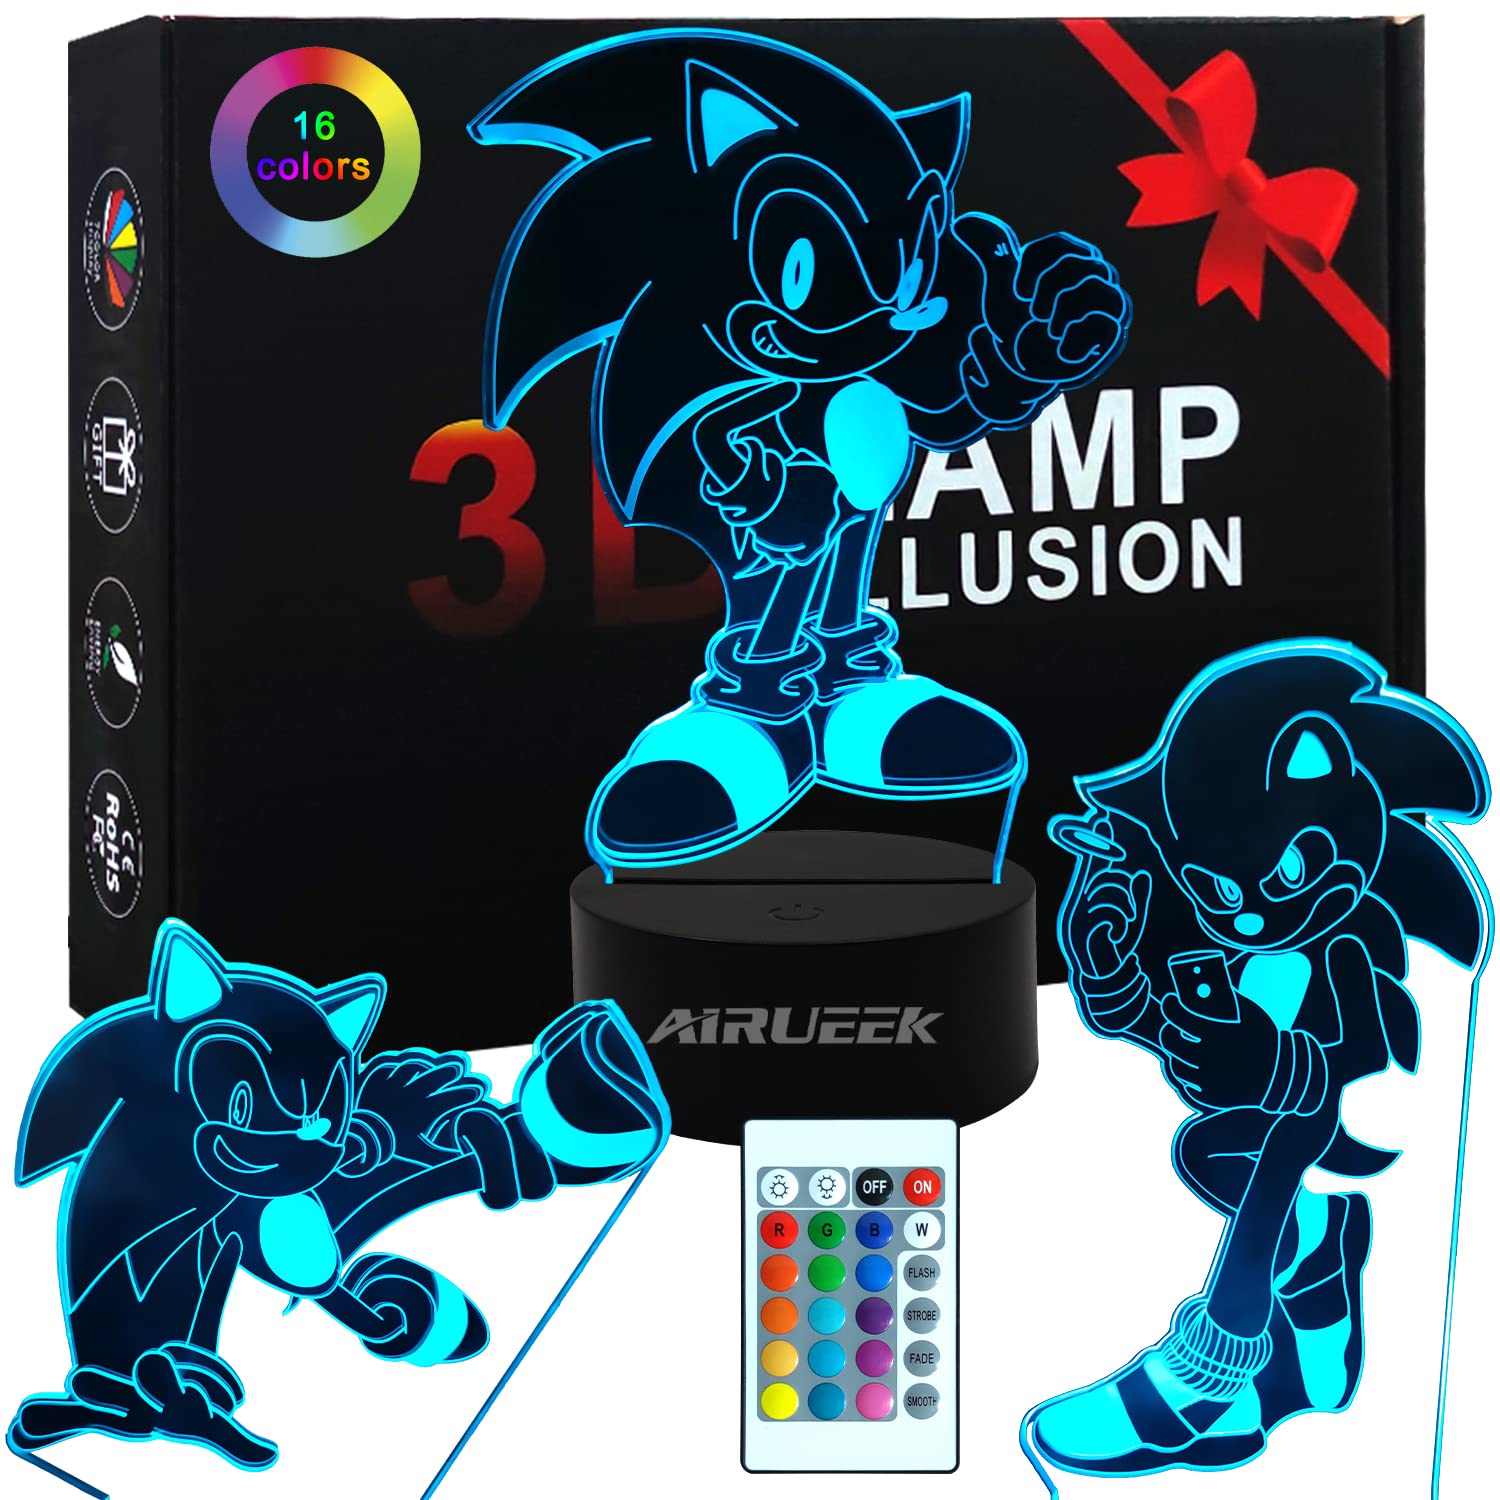 Sonic Toys Night Light for Kids 3D Illusion Lamp-3 Pattern -Bedroom Decoration Creative Anime Sonic Hedgehog Gifts for Women Kids Boys Sonic Fans